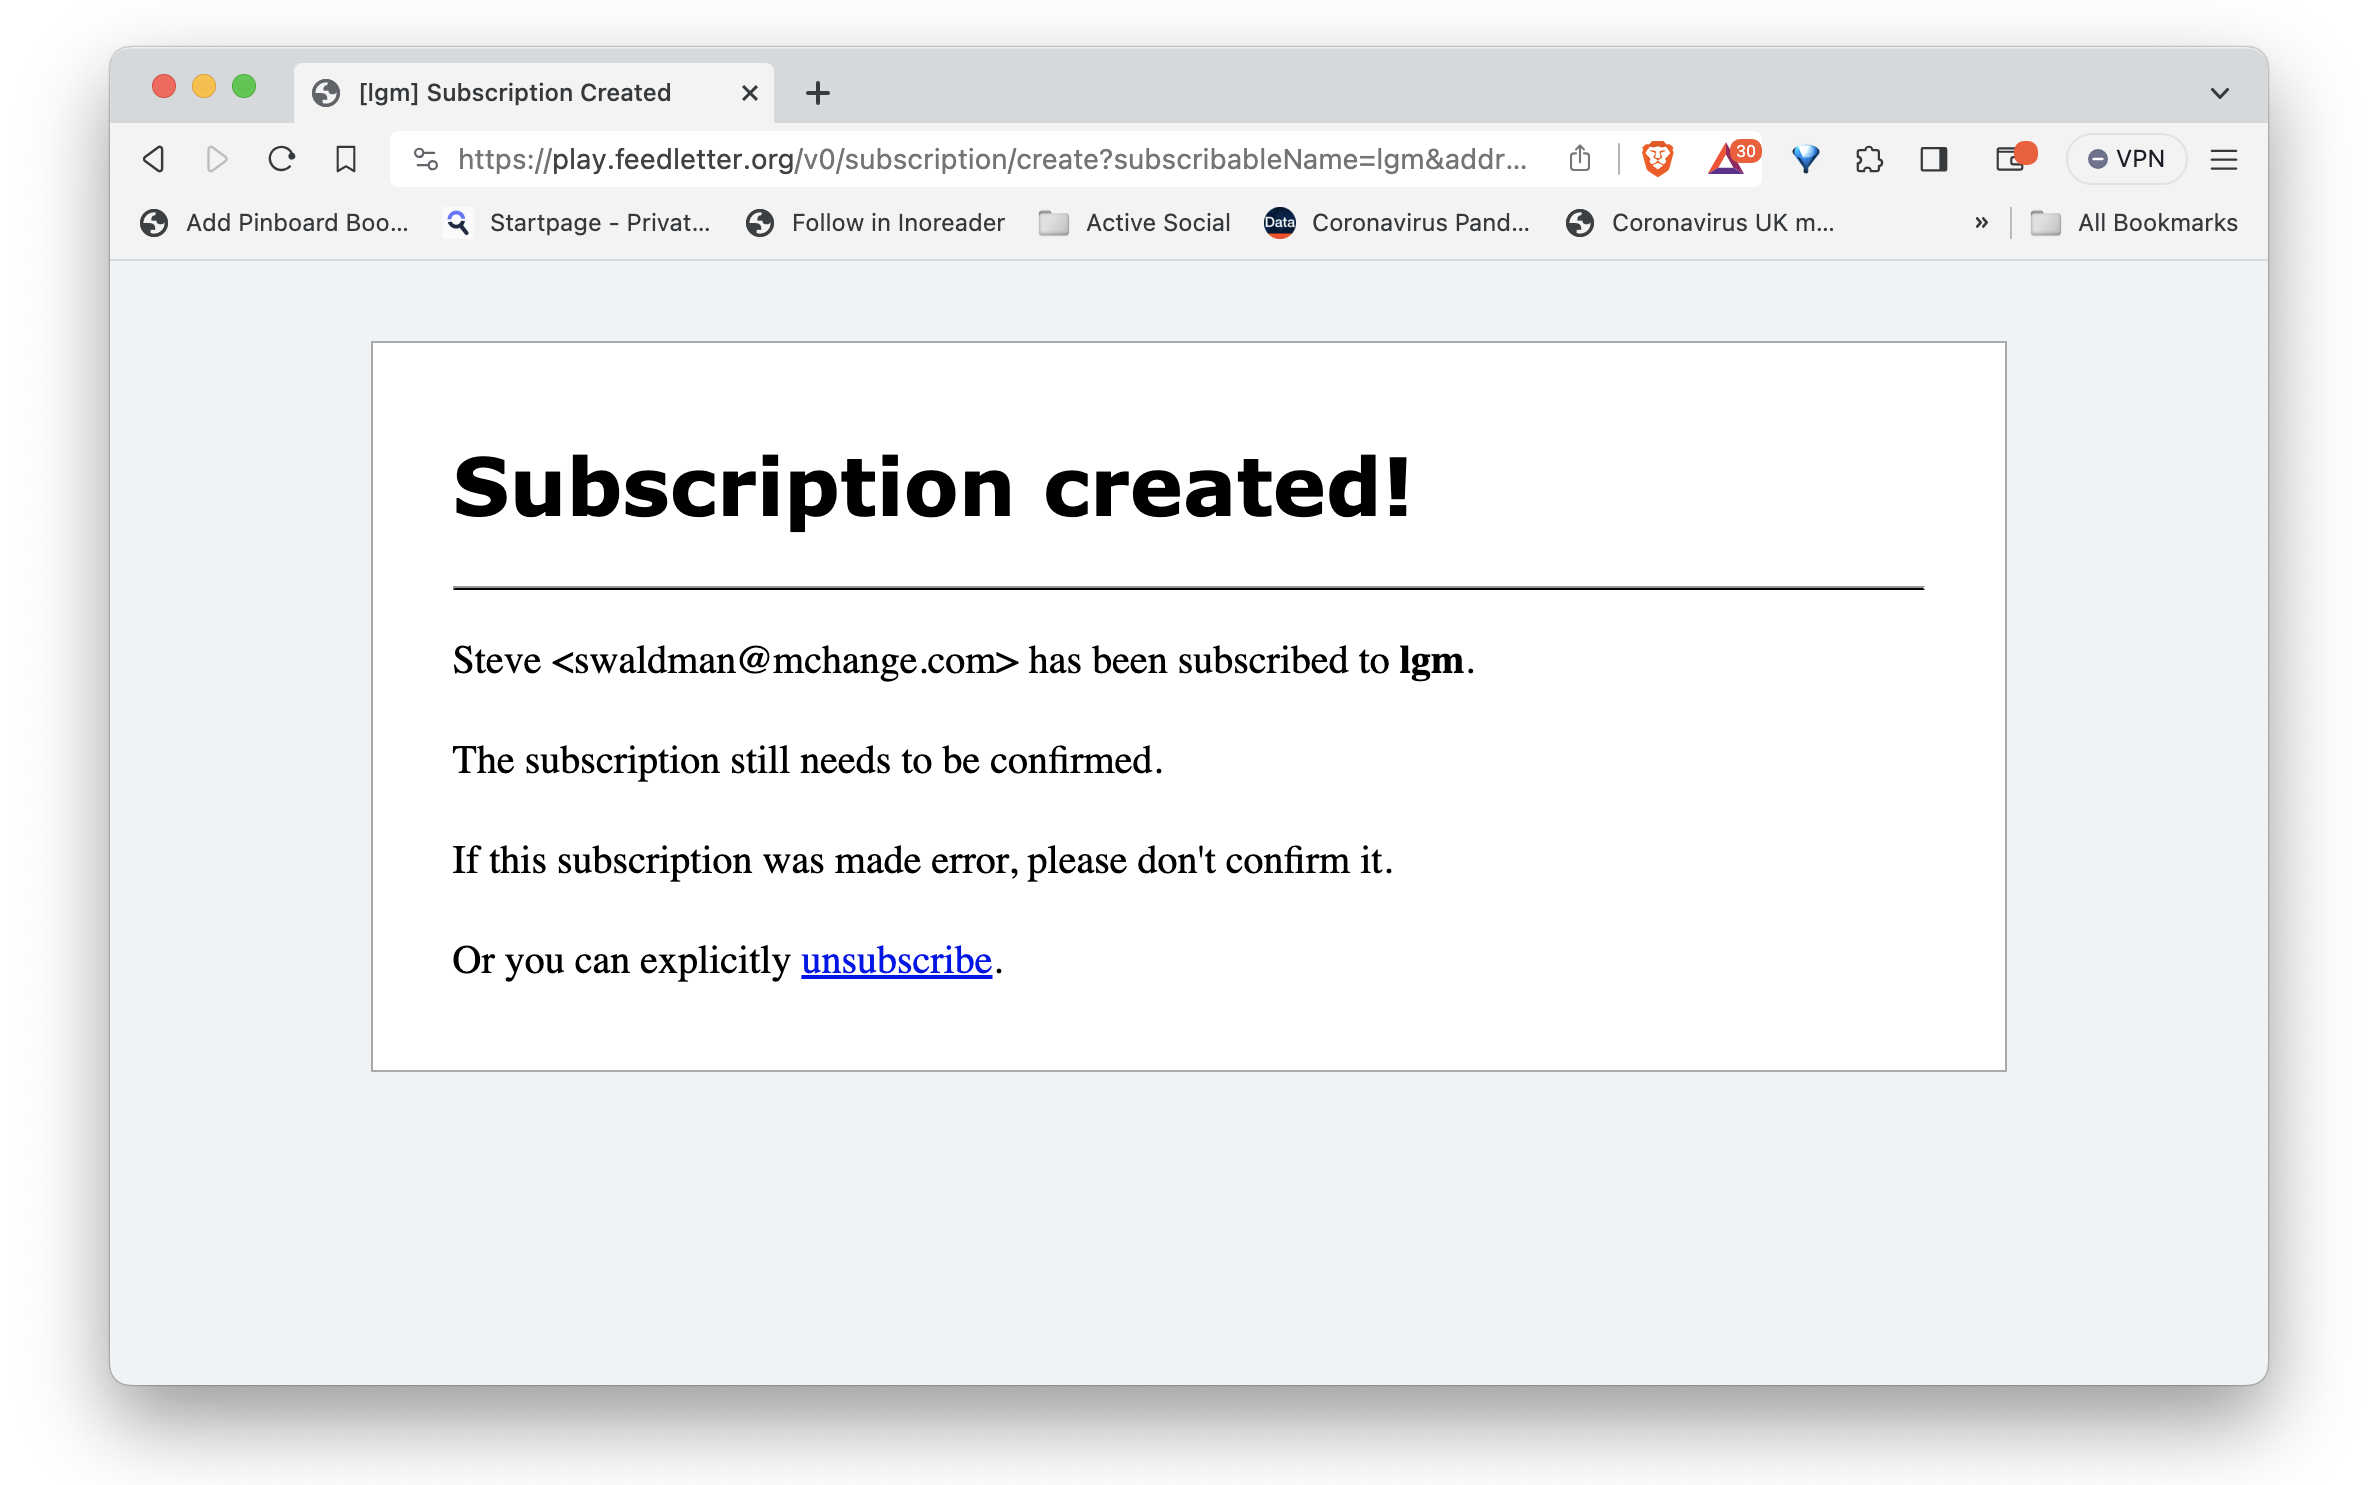 Screenshot of 'Subscription Created' page